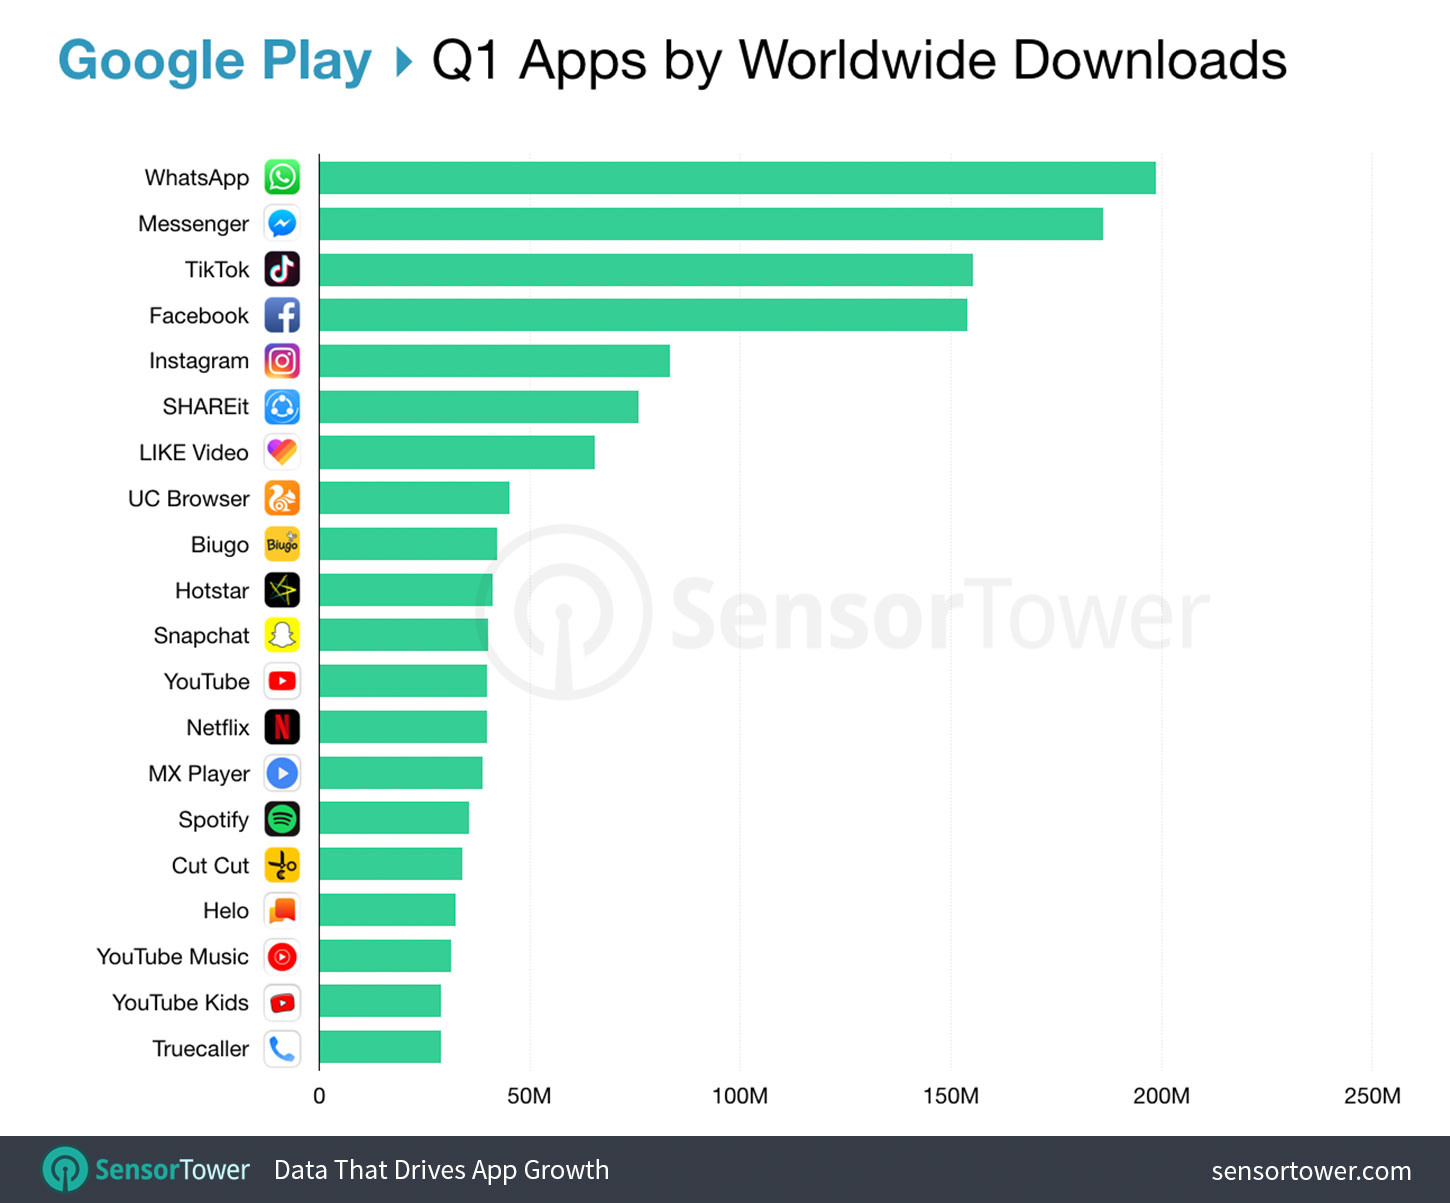 Top Apps Worldwide for Q1 2019 by Downloads